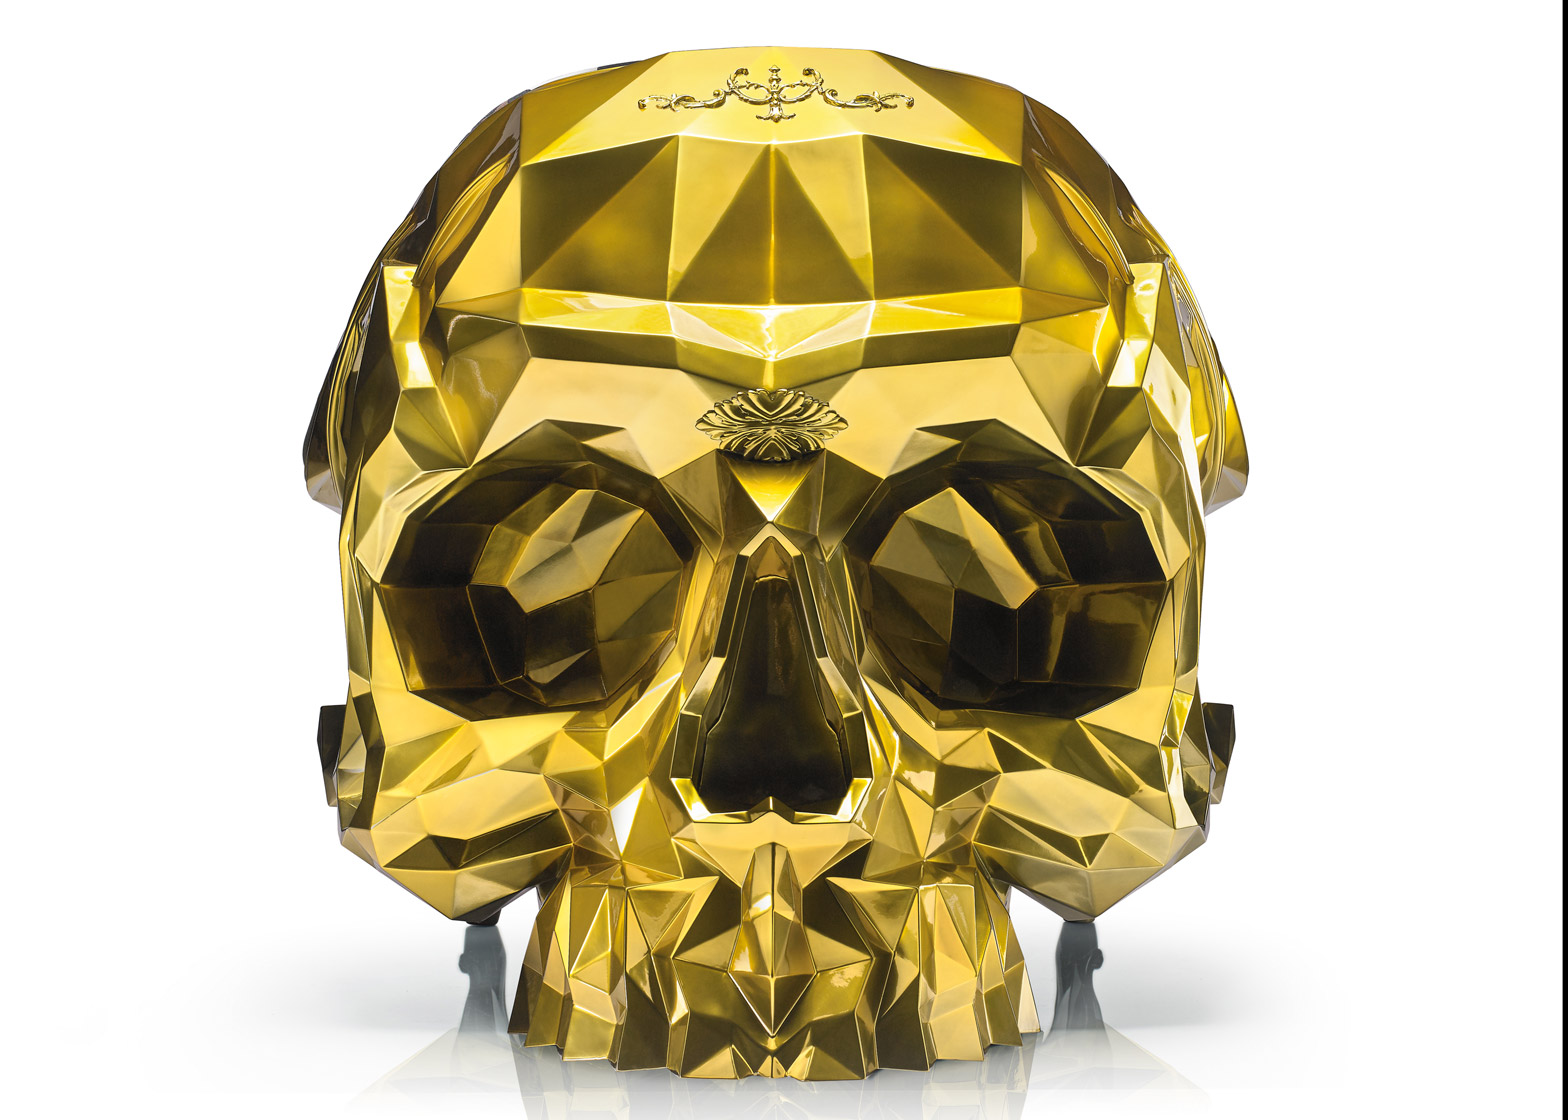 Harow's gold-plated skull armchair carries a $500k price tag | Fli...